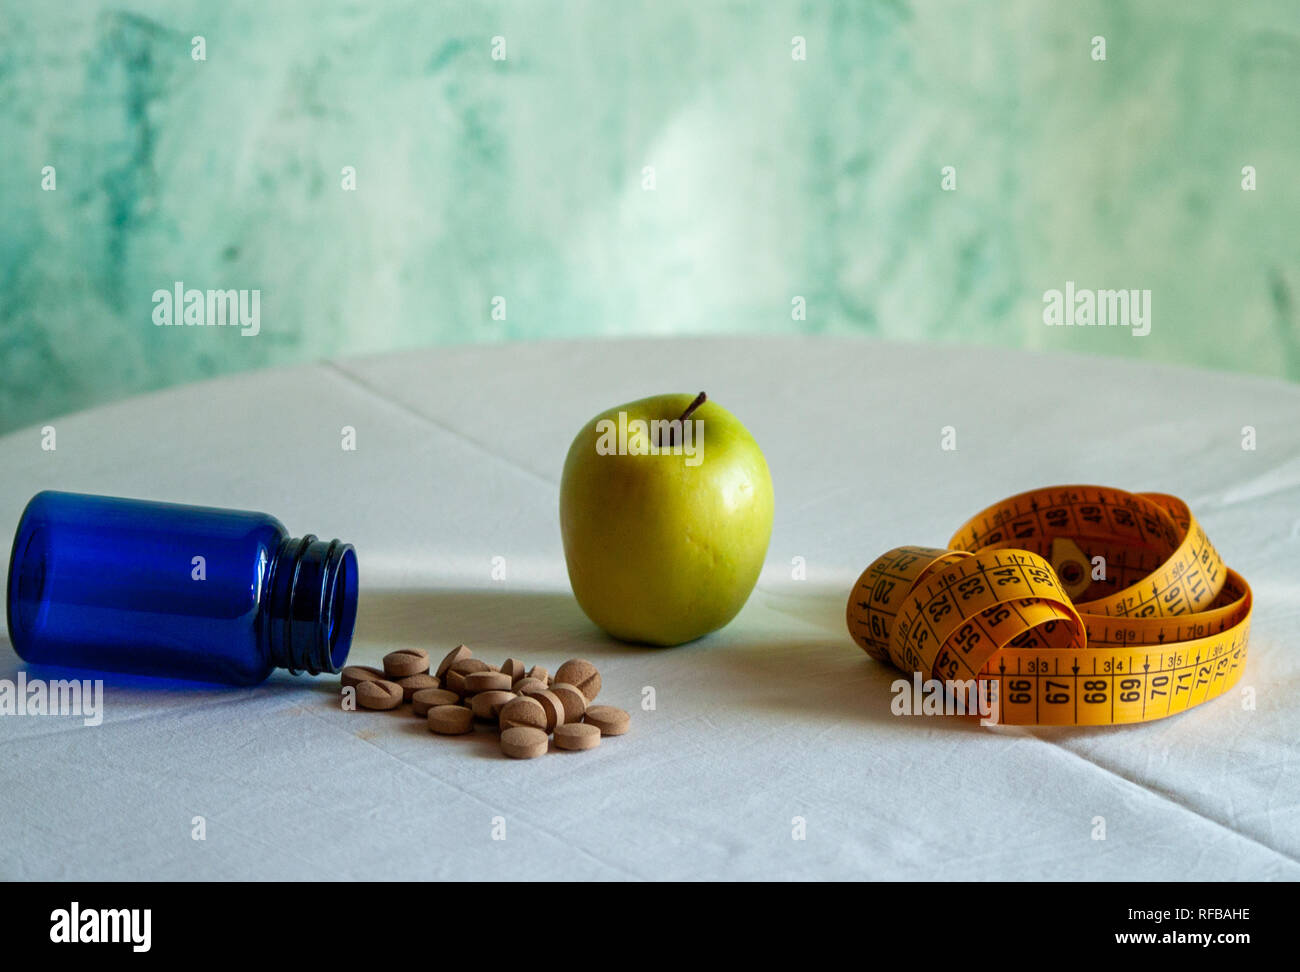 An apple, a tape measure and a blue container with vegetable fiber pills on a table Stock Photo